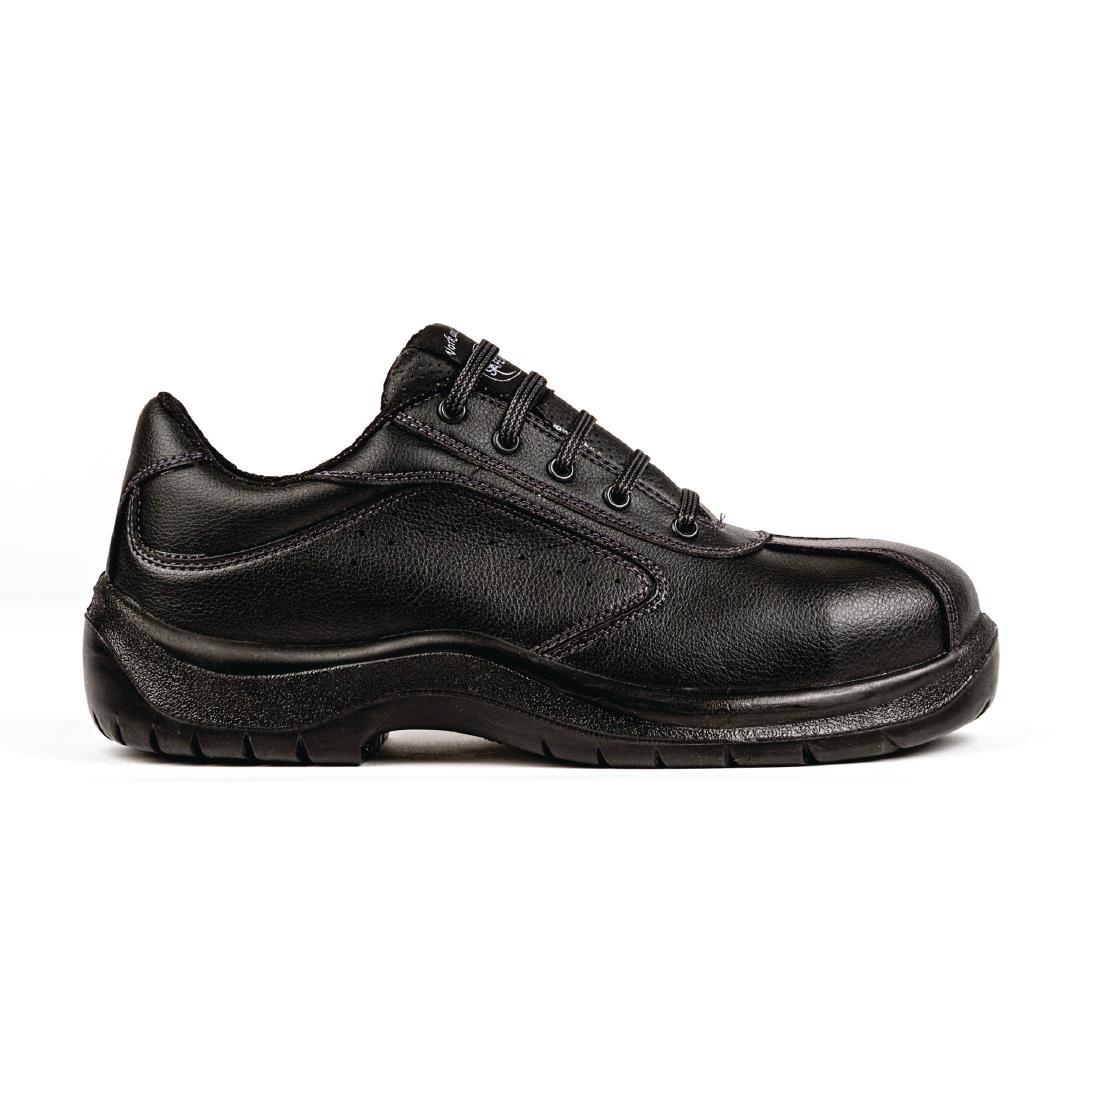 Slipbuster Side Perforated Lace Up Black 38